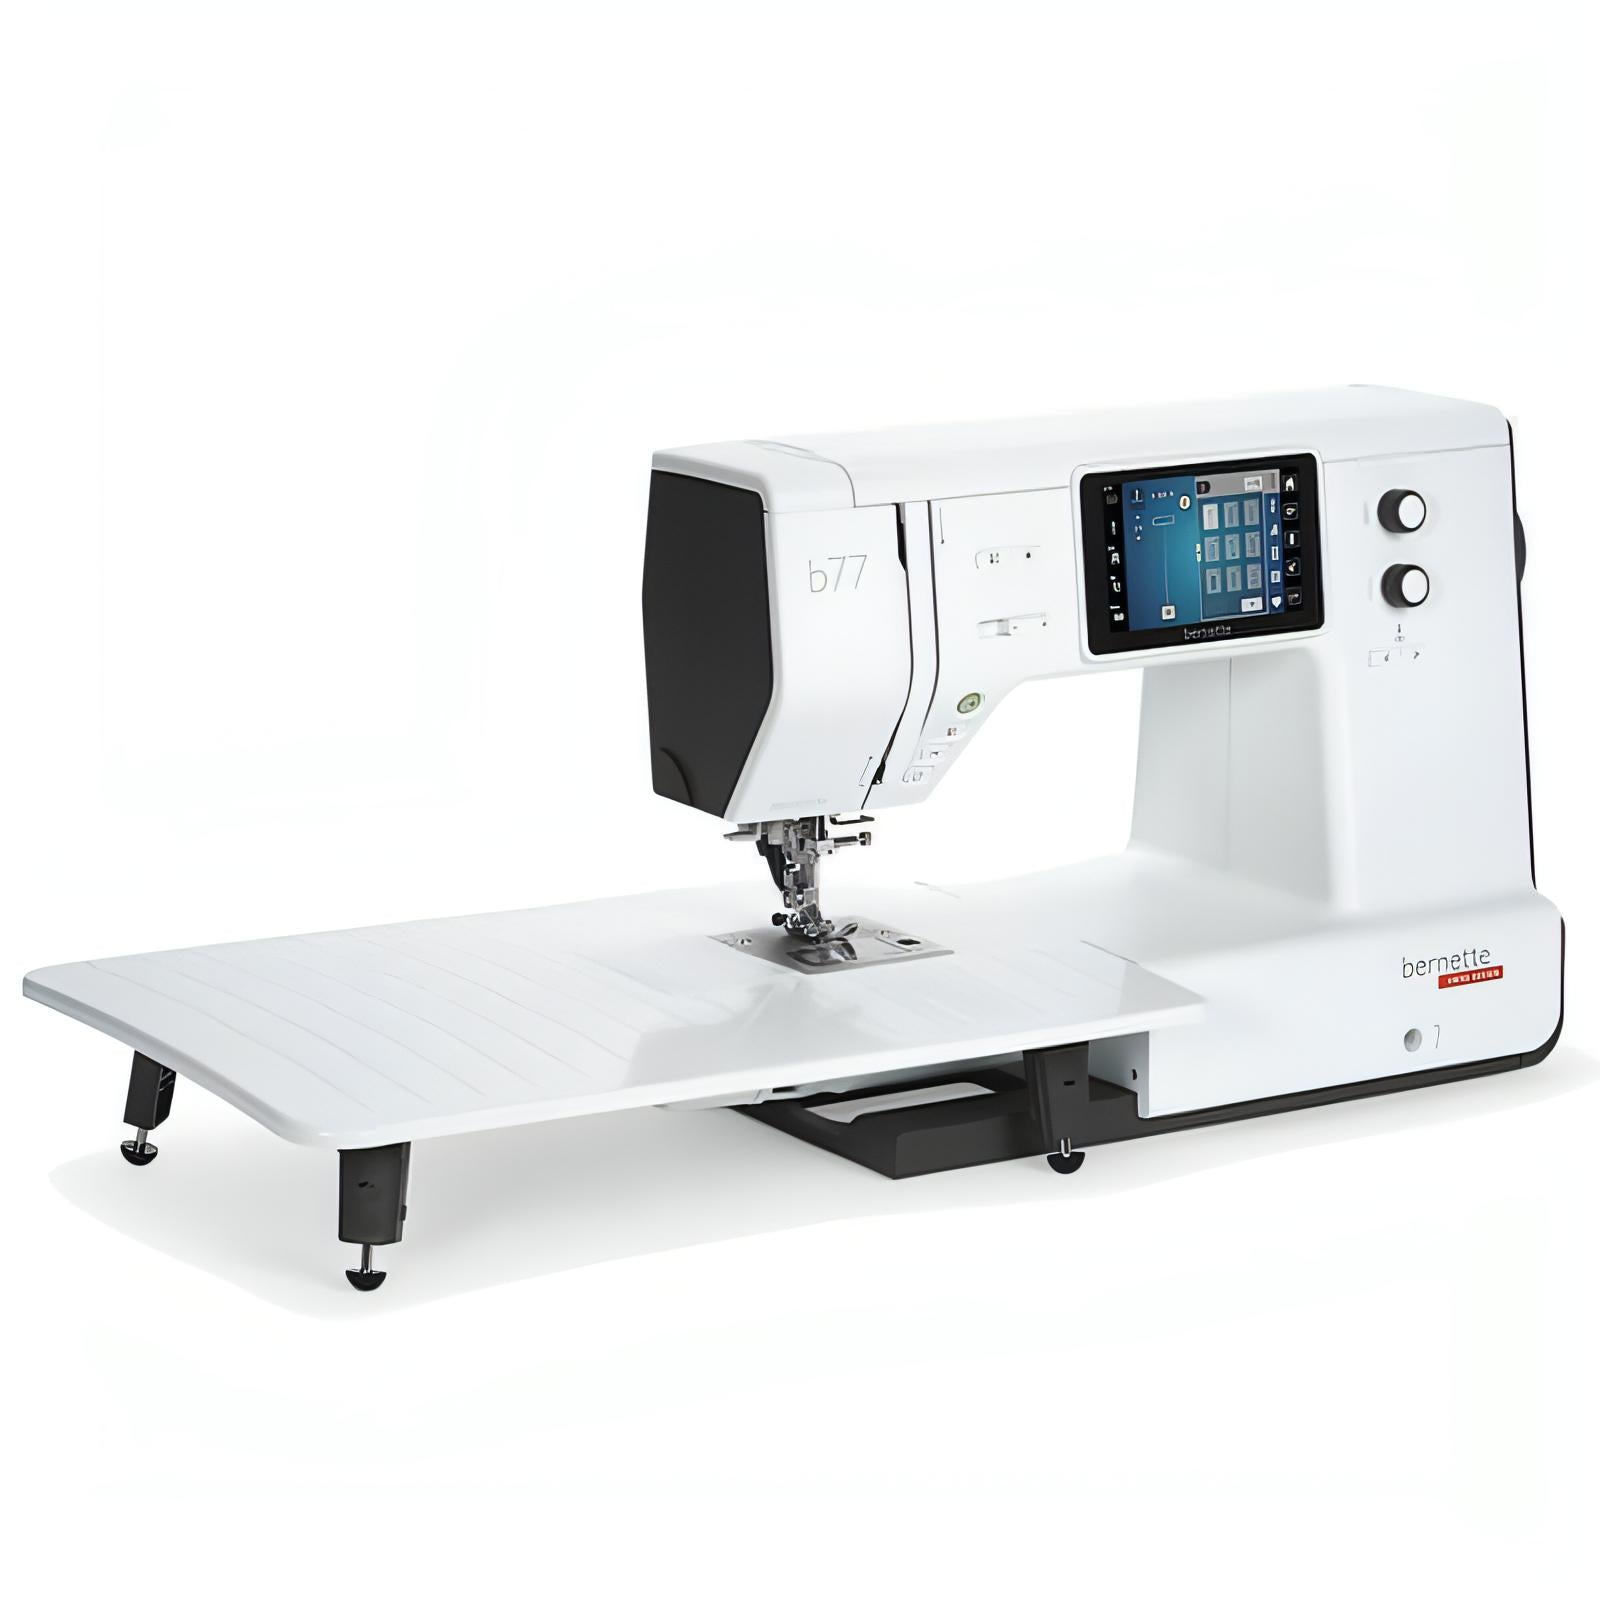 bernette by BERNINA B77 Sewing and Quilting Machine - 9 inch long arm - 1 to 2 week delivery